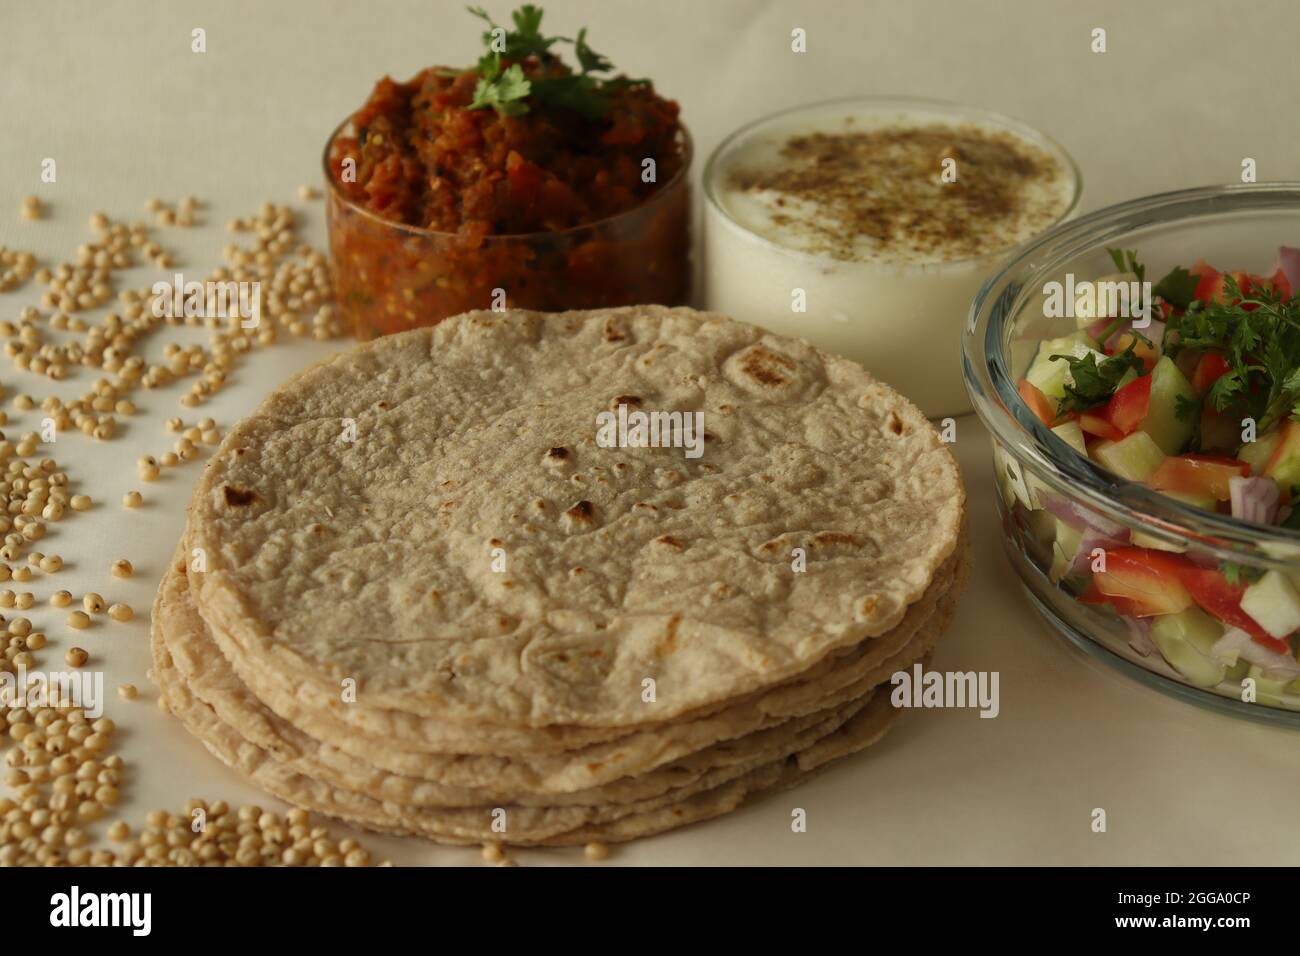 Jowar roti or jowar bhakri are healthy gluten free flatbreads made with sorghum millet flour. Served with mashed and sauteed fire roasted brinjal alon Stock Photo